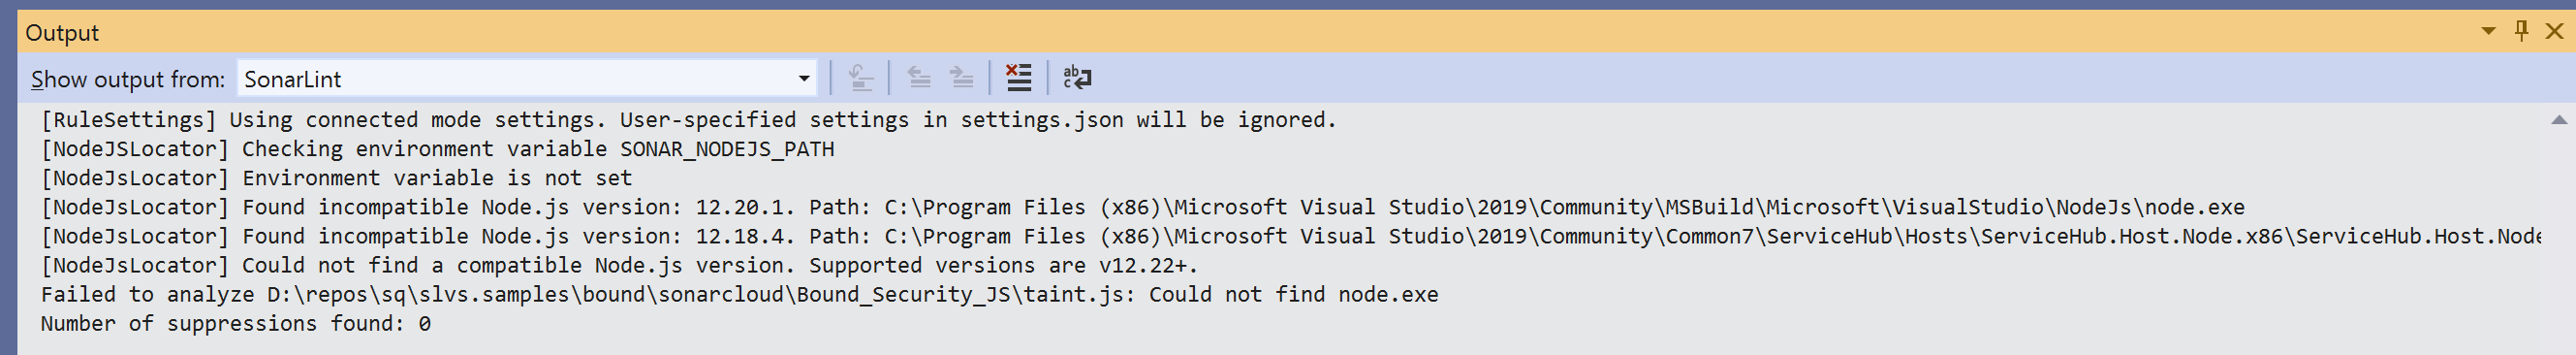 Your Visual Studio Output window will look similar if a compatible Node.js version is not found by SonarLint